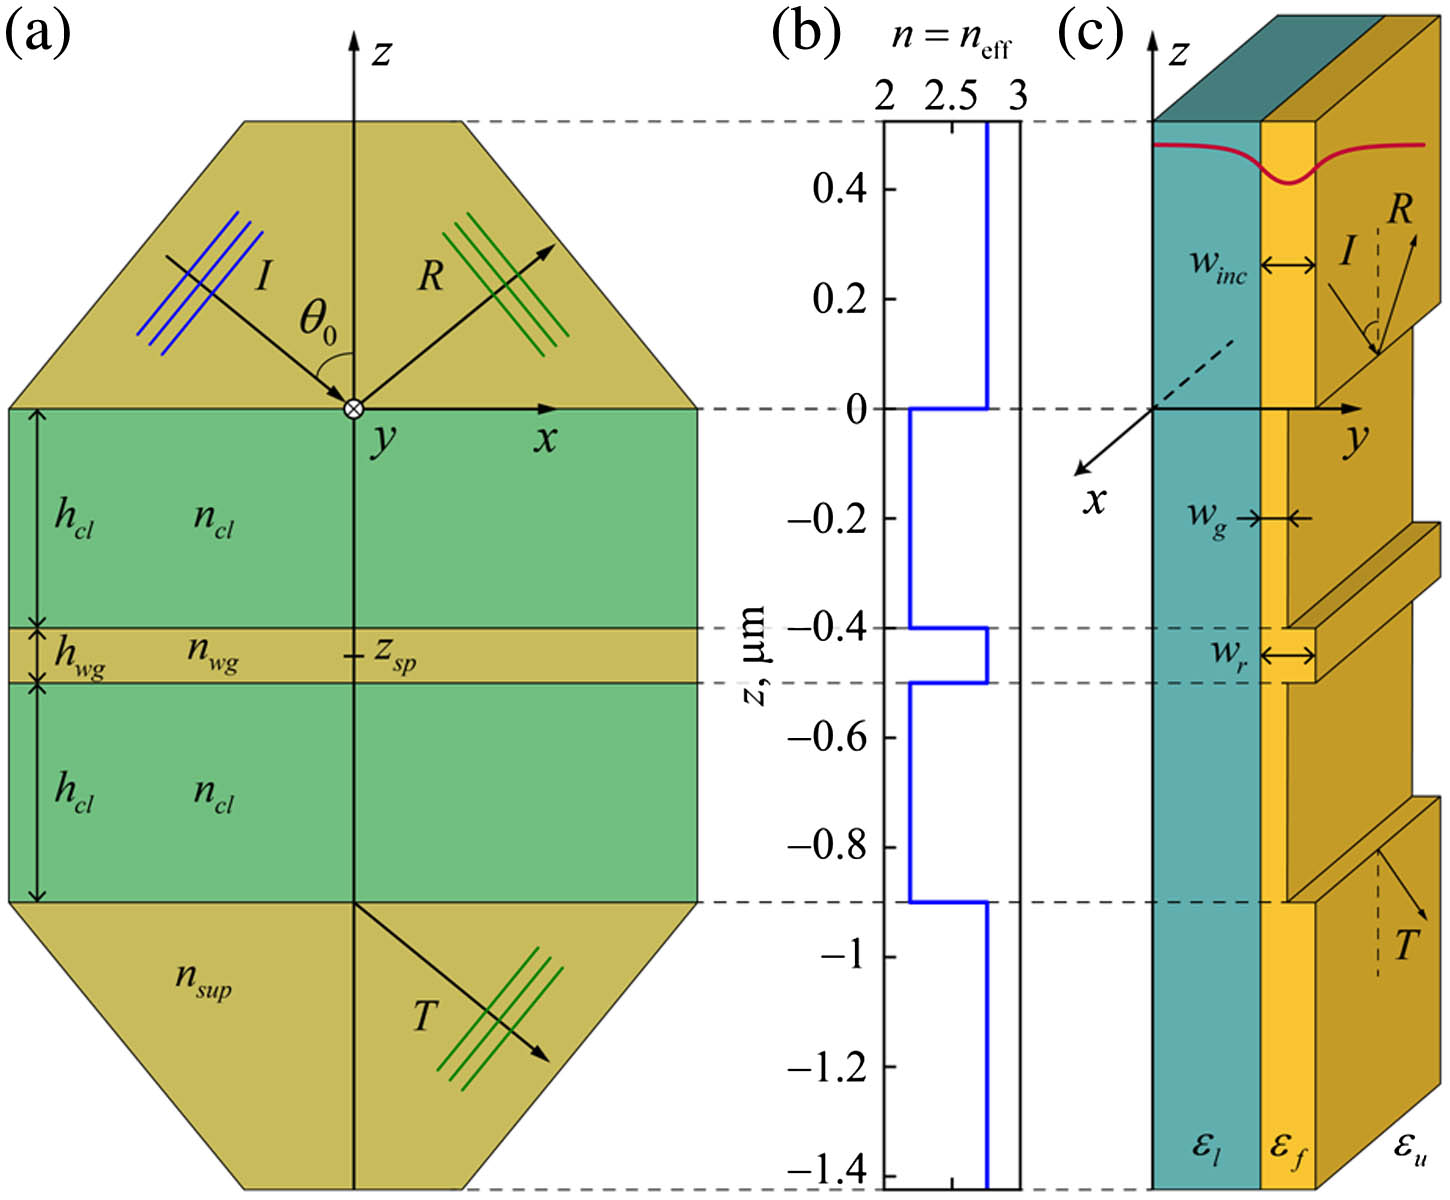 Geometry of (a) a conventional three-layer resonant structure and (c) the proposed two-groove planar filter, and (b) the refractive (effective refractive) index profile of the structure. The values in (b) and dimensions in (c) correspond to one of the examples described in the text. I, R, and T denote incident, reflected, and transmitted waves, respectively.